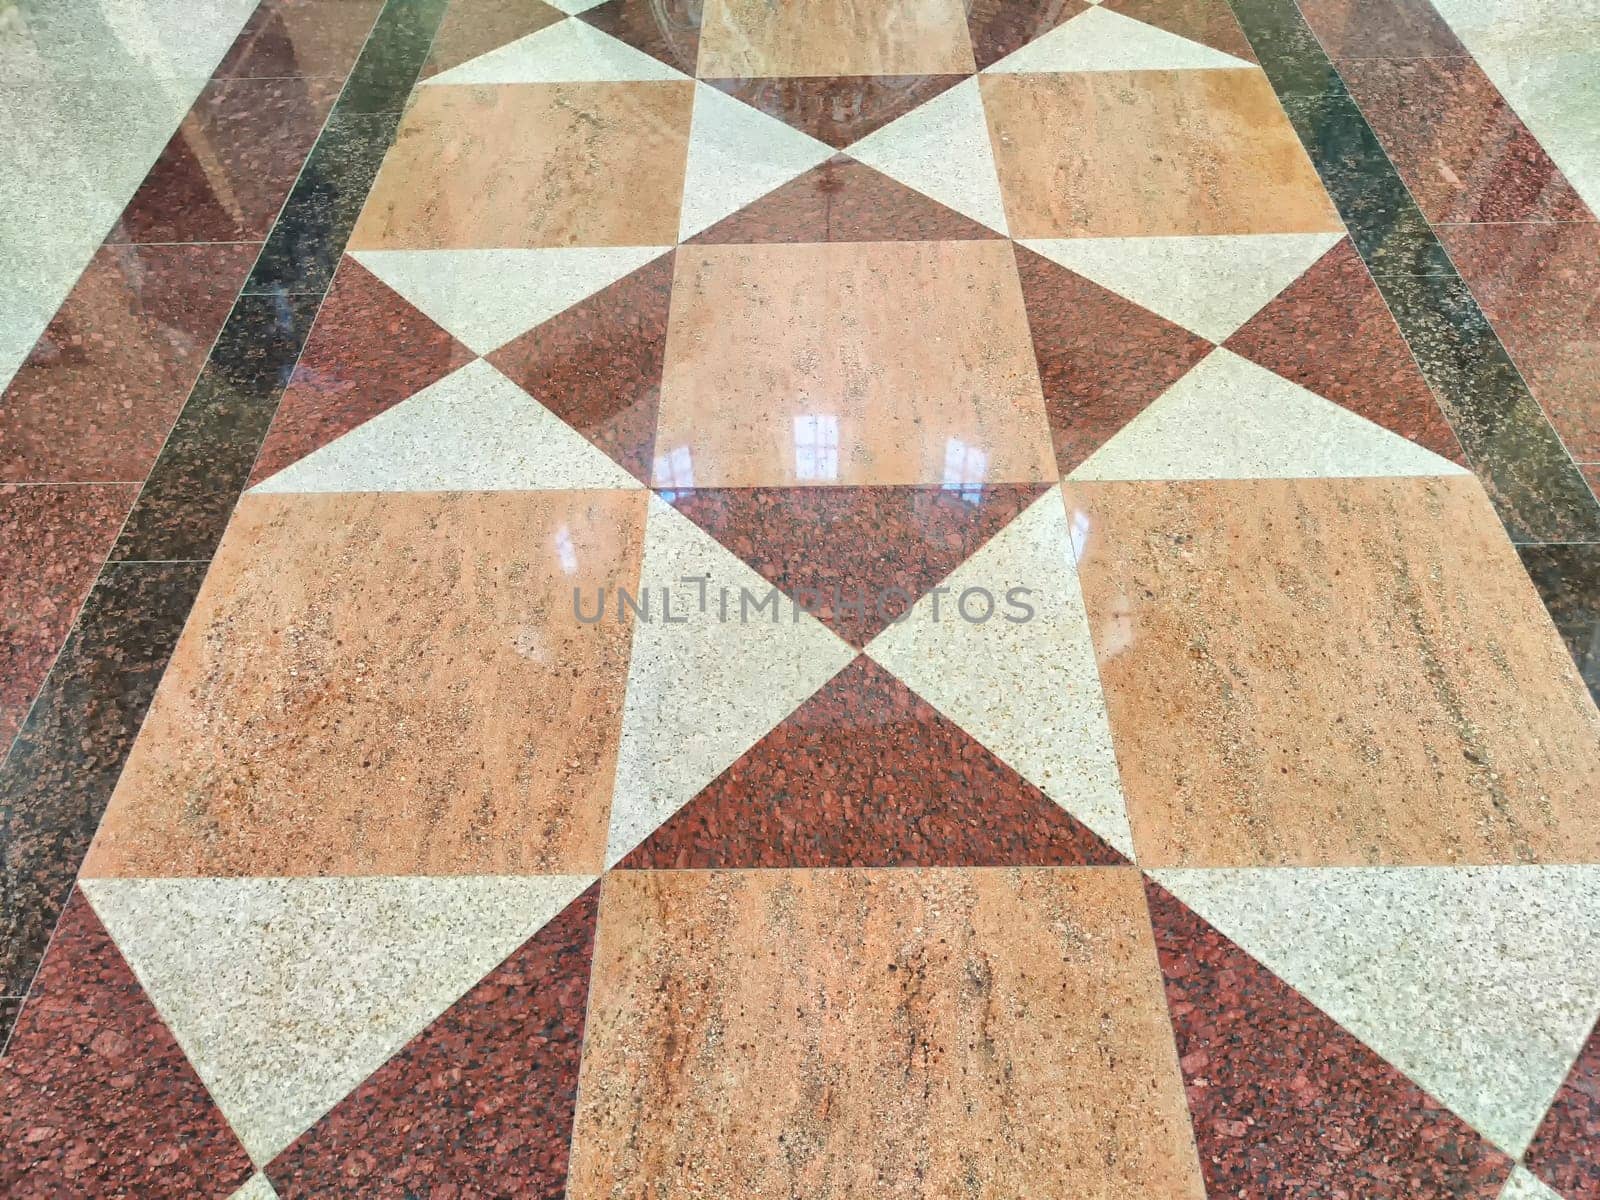 Mosaic tiles are shiny on the path, sidewalk or indoors. A glossy floor adorned with a diamond-shaped mosaic tile design